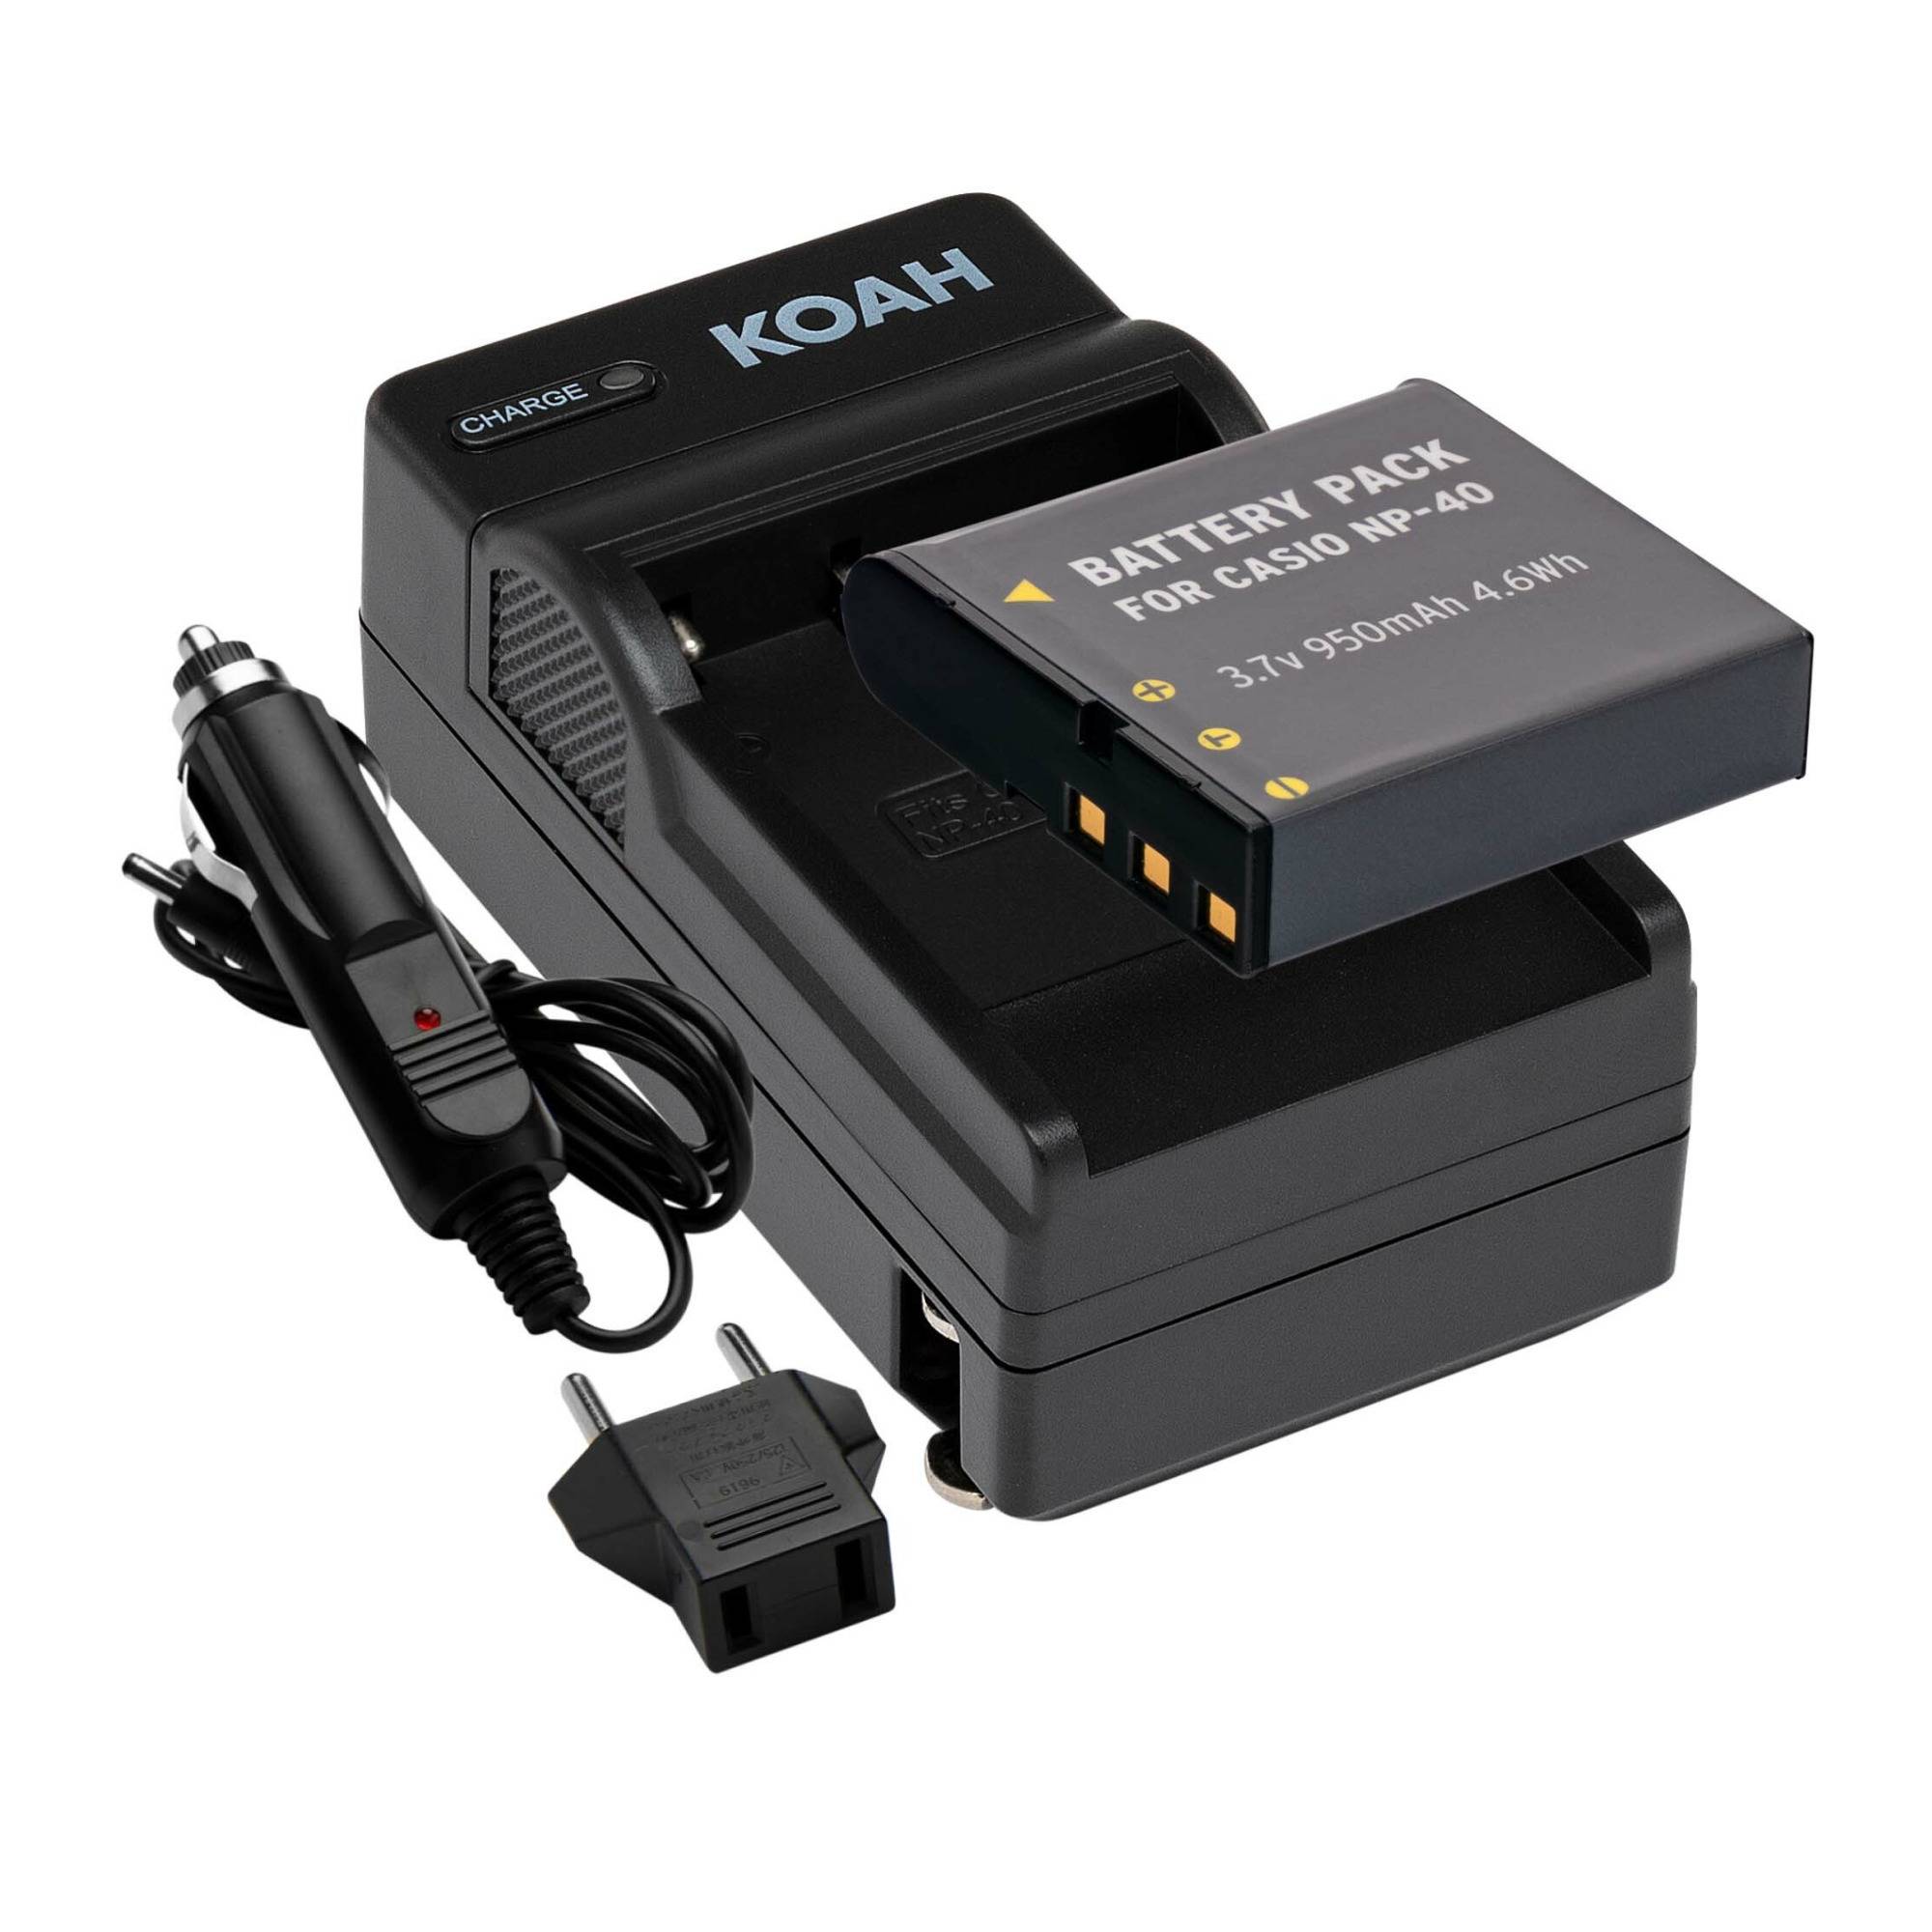 Koah Rechargeable Lithium-Ion Battery and Charger Kit Compatible with Casio NP-40 and Kodak LB-060